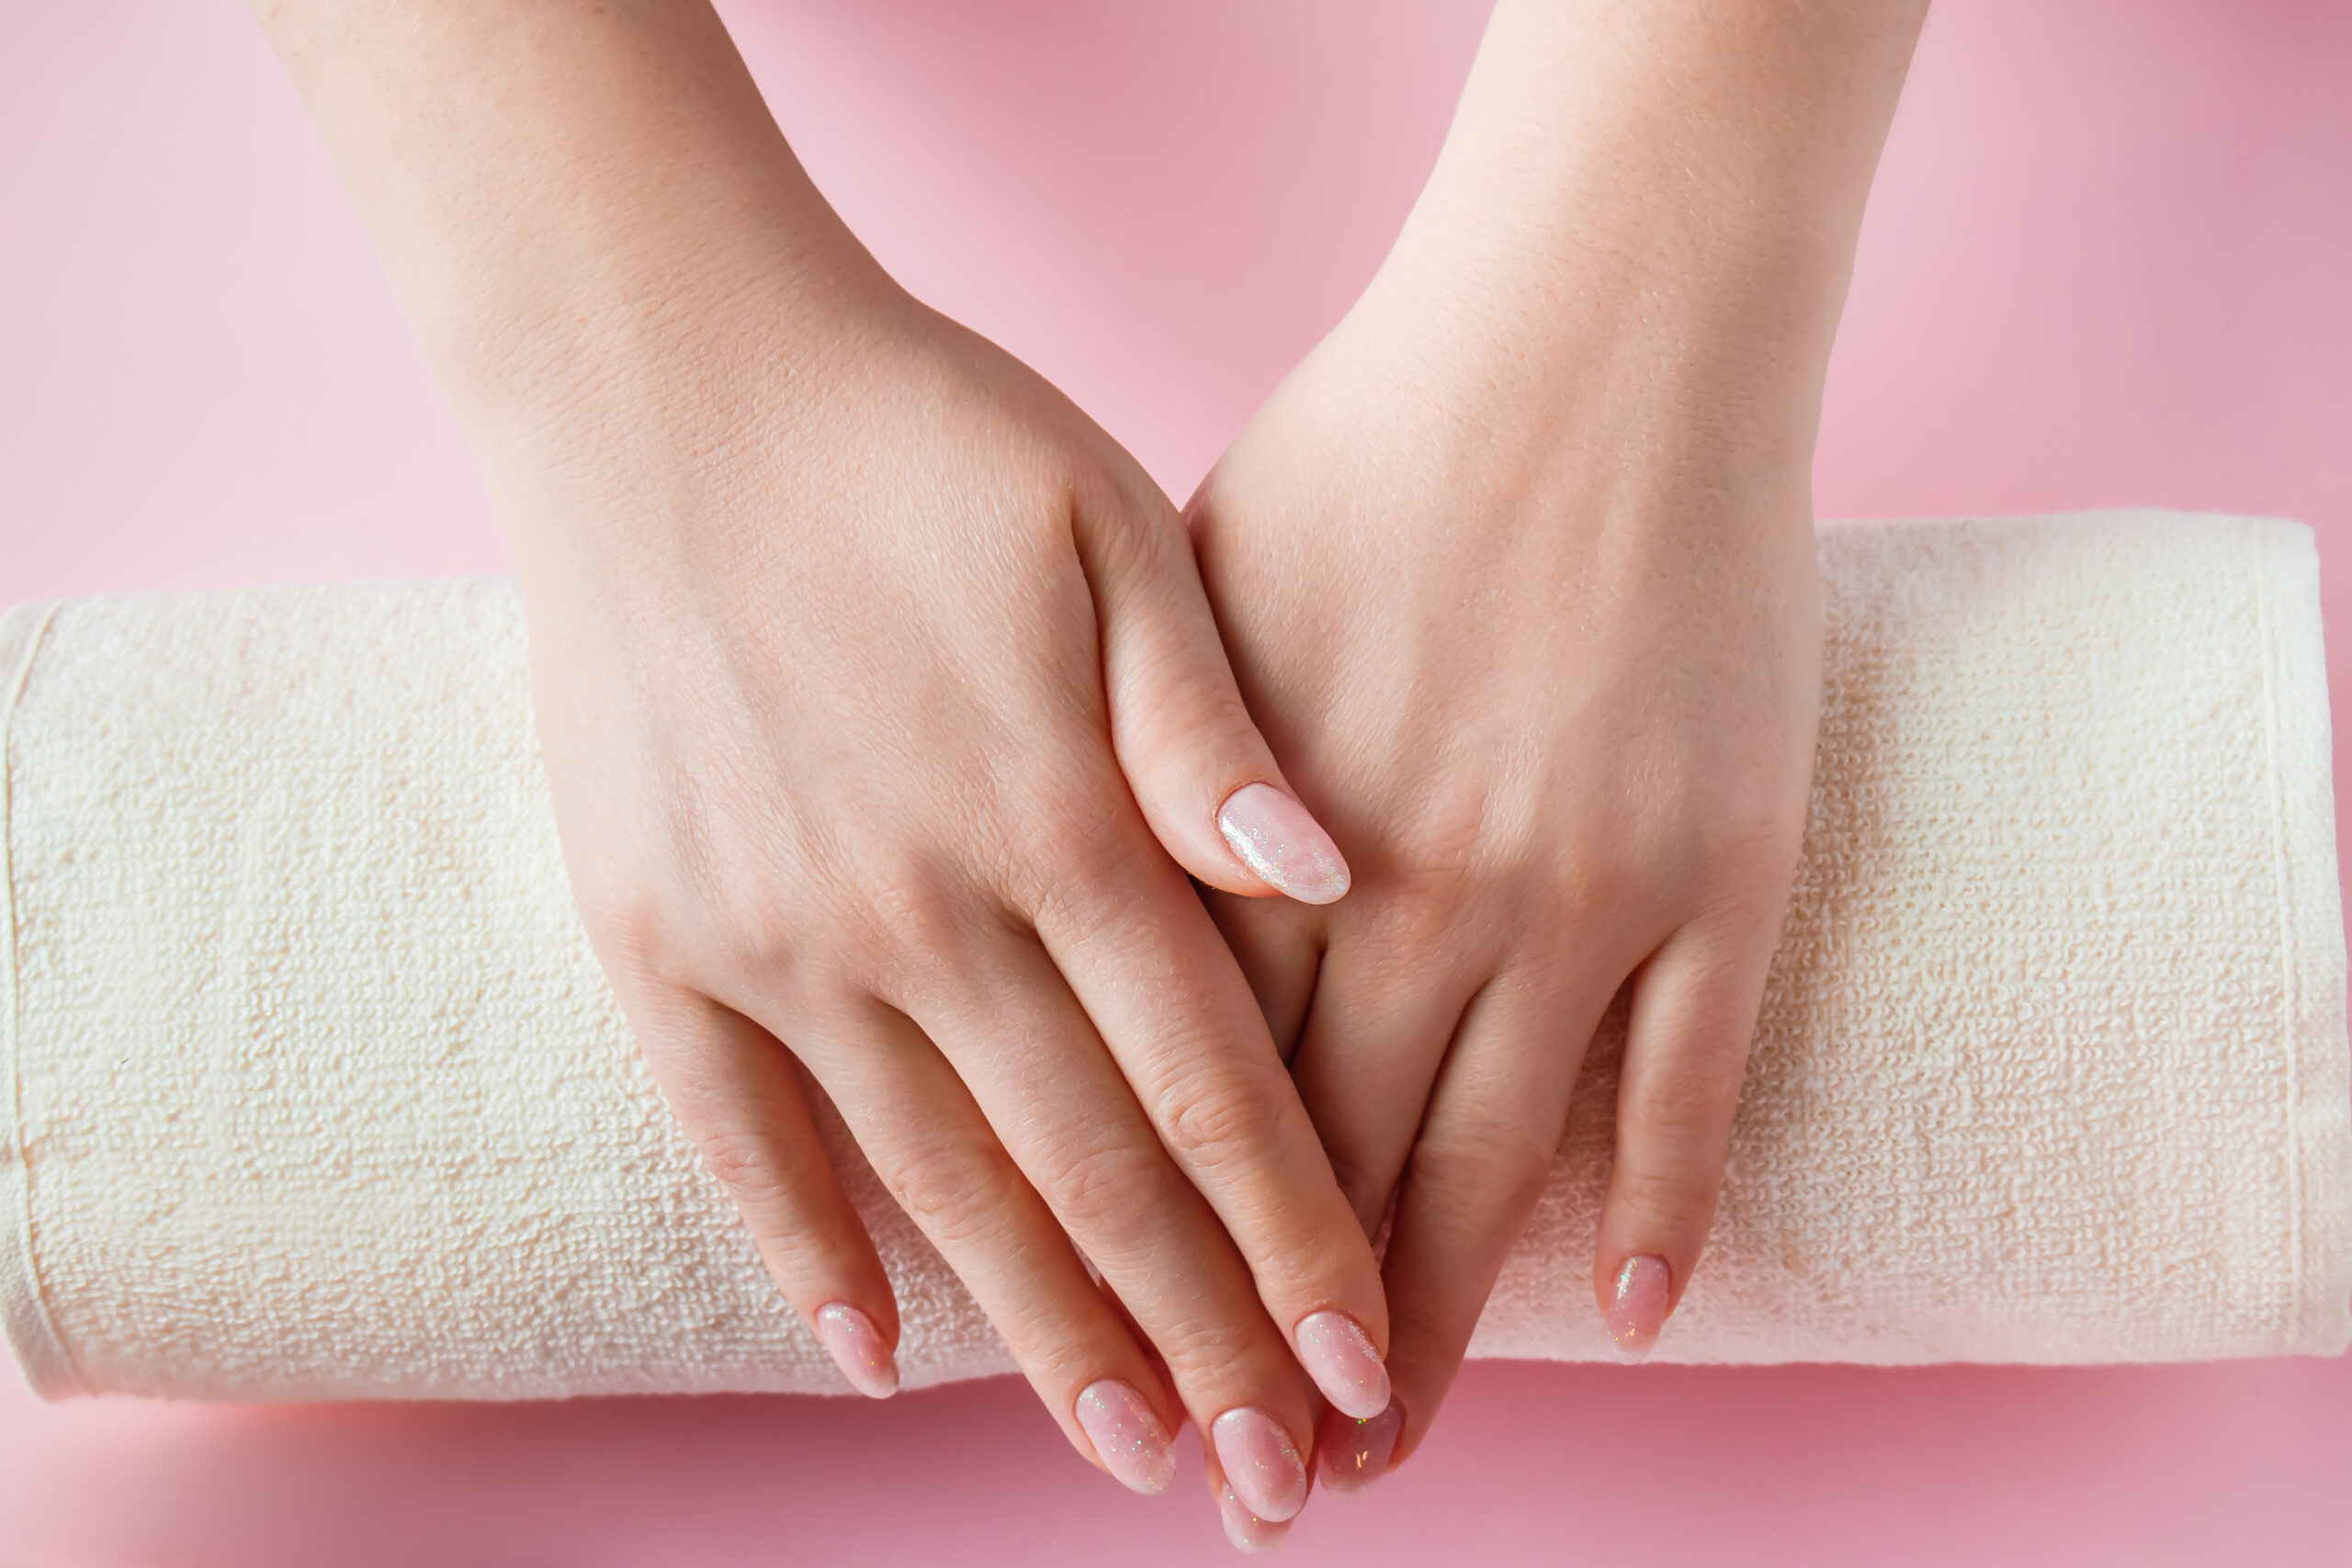 Some useful tips about nail care